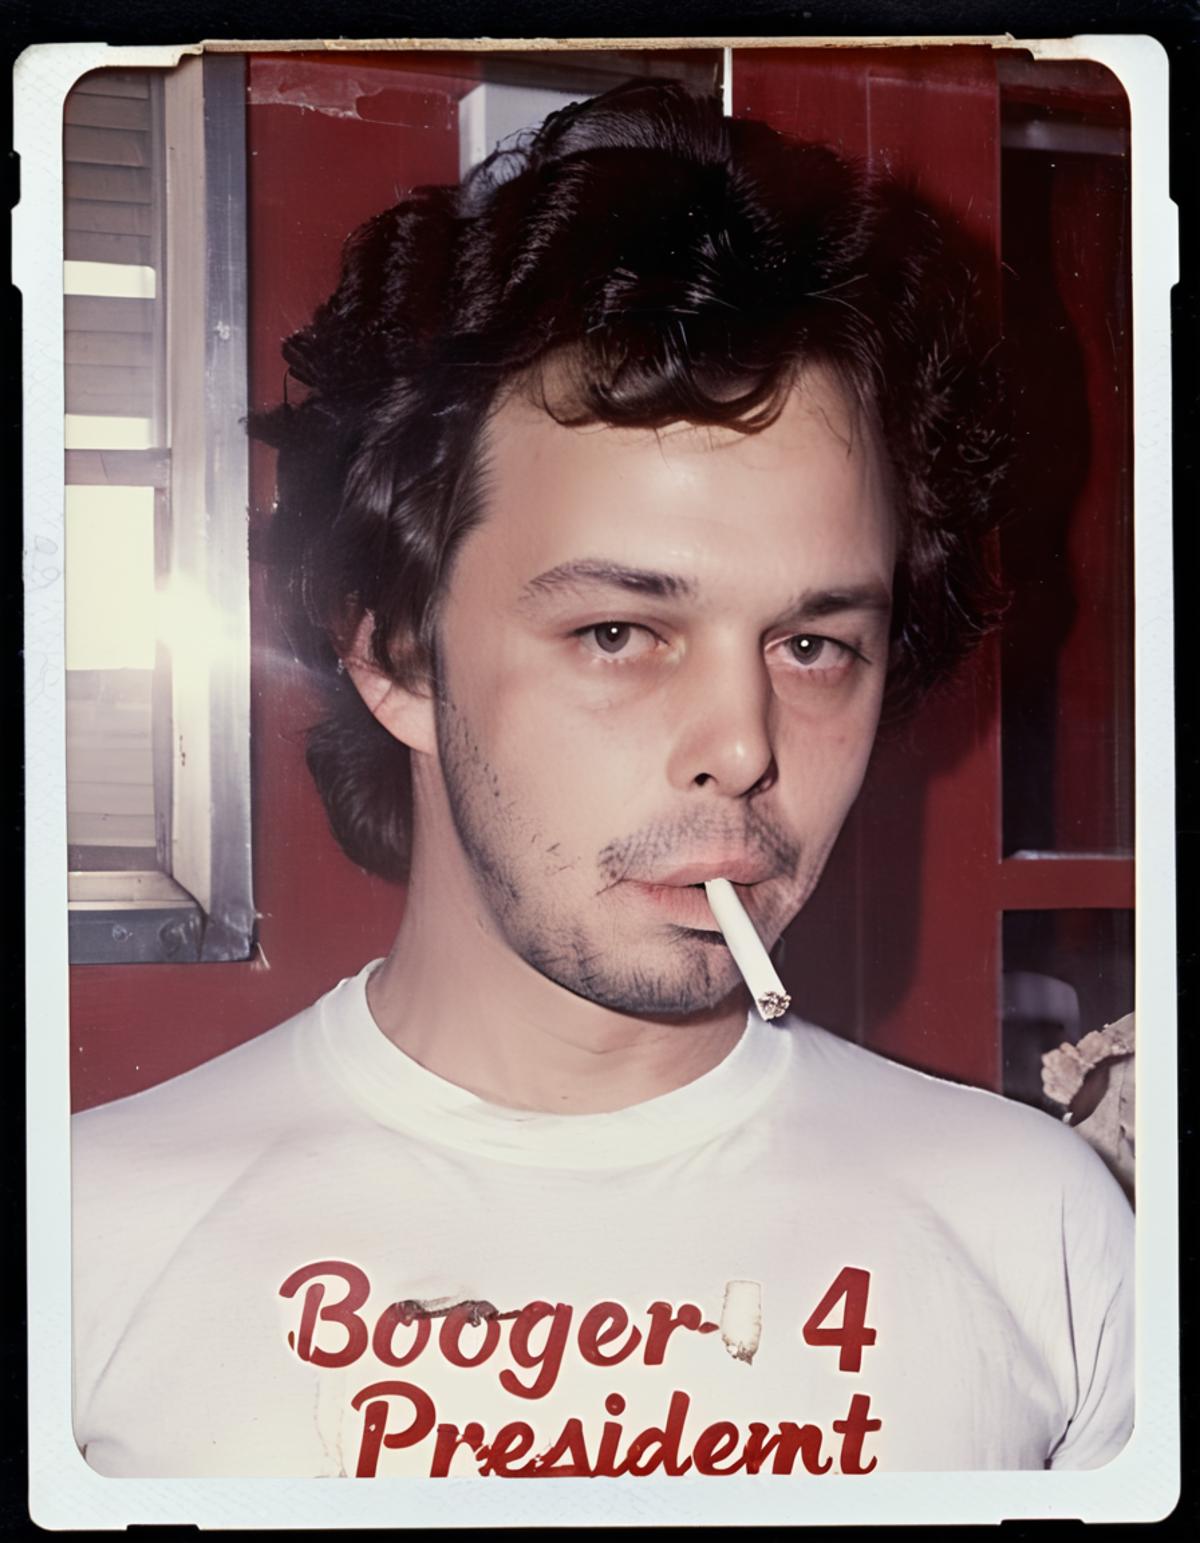 Booger (80s Curtis Armstrong) image by Tiny_Tsuruta